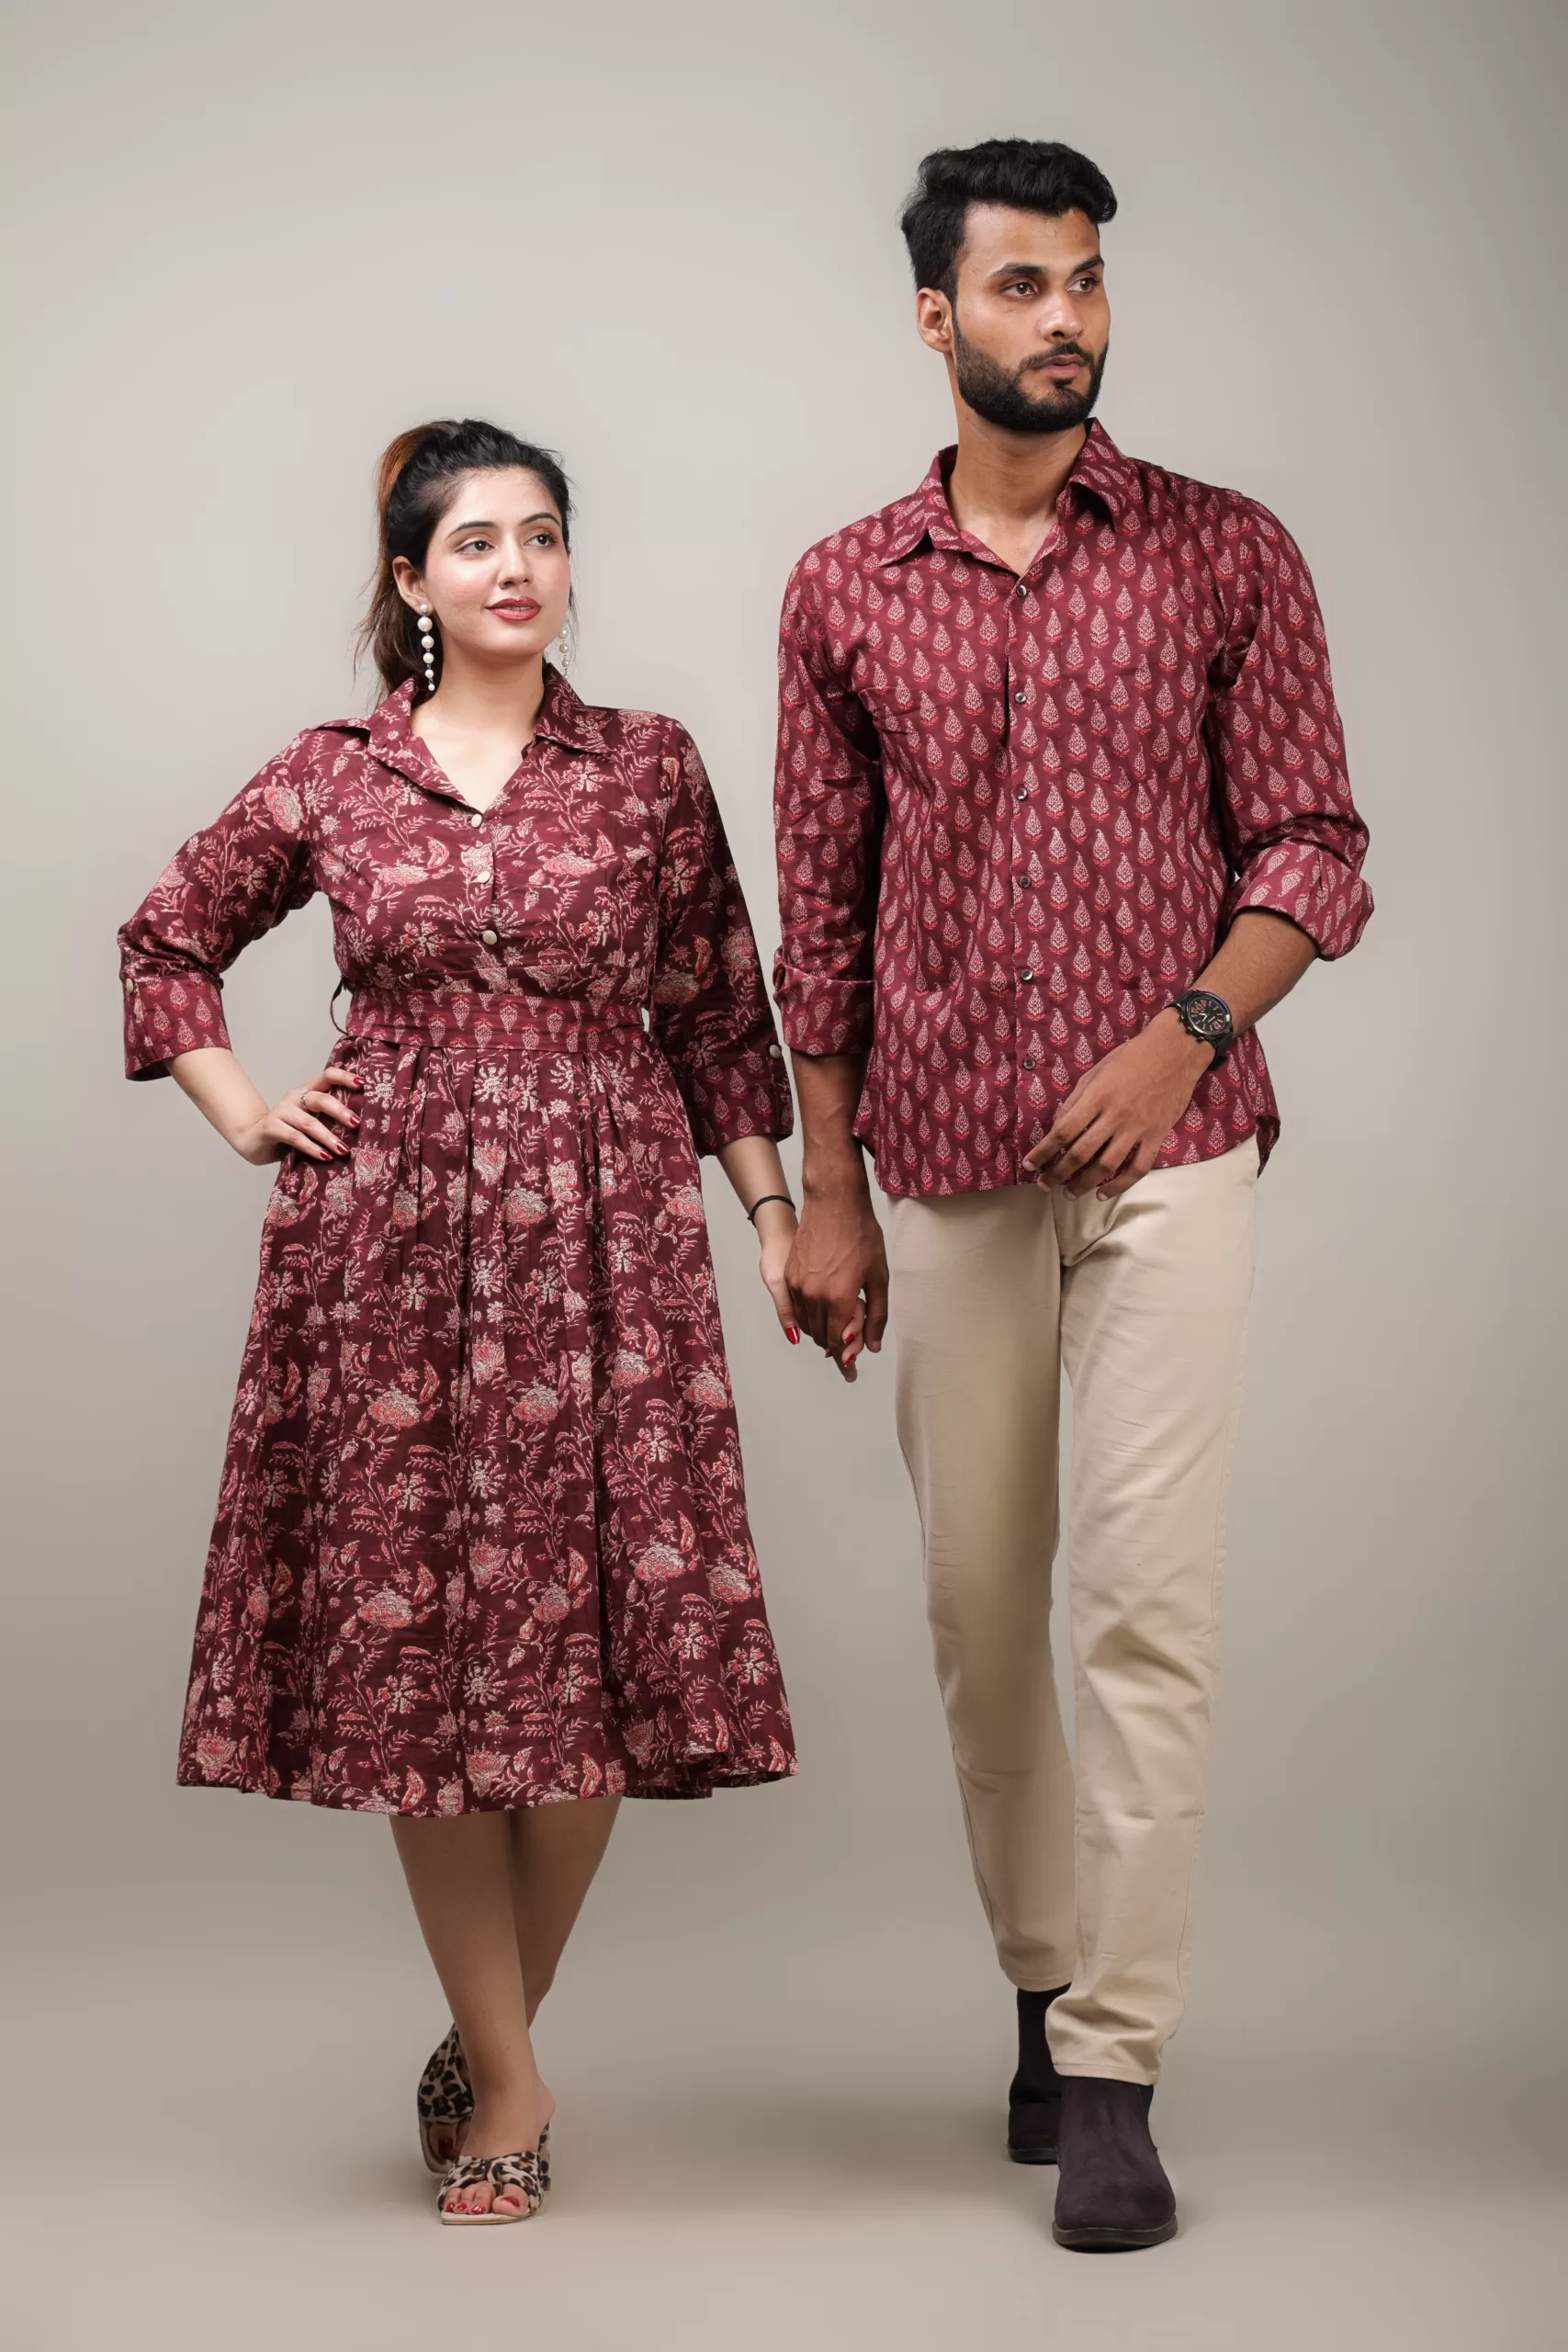 Buy Couple Dress Online, Couple Matching Outfit - PeterPair